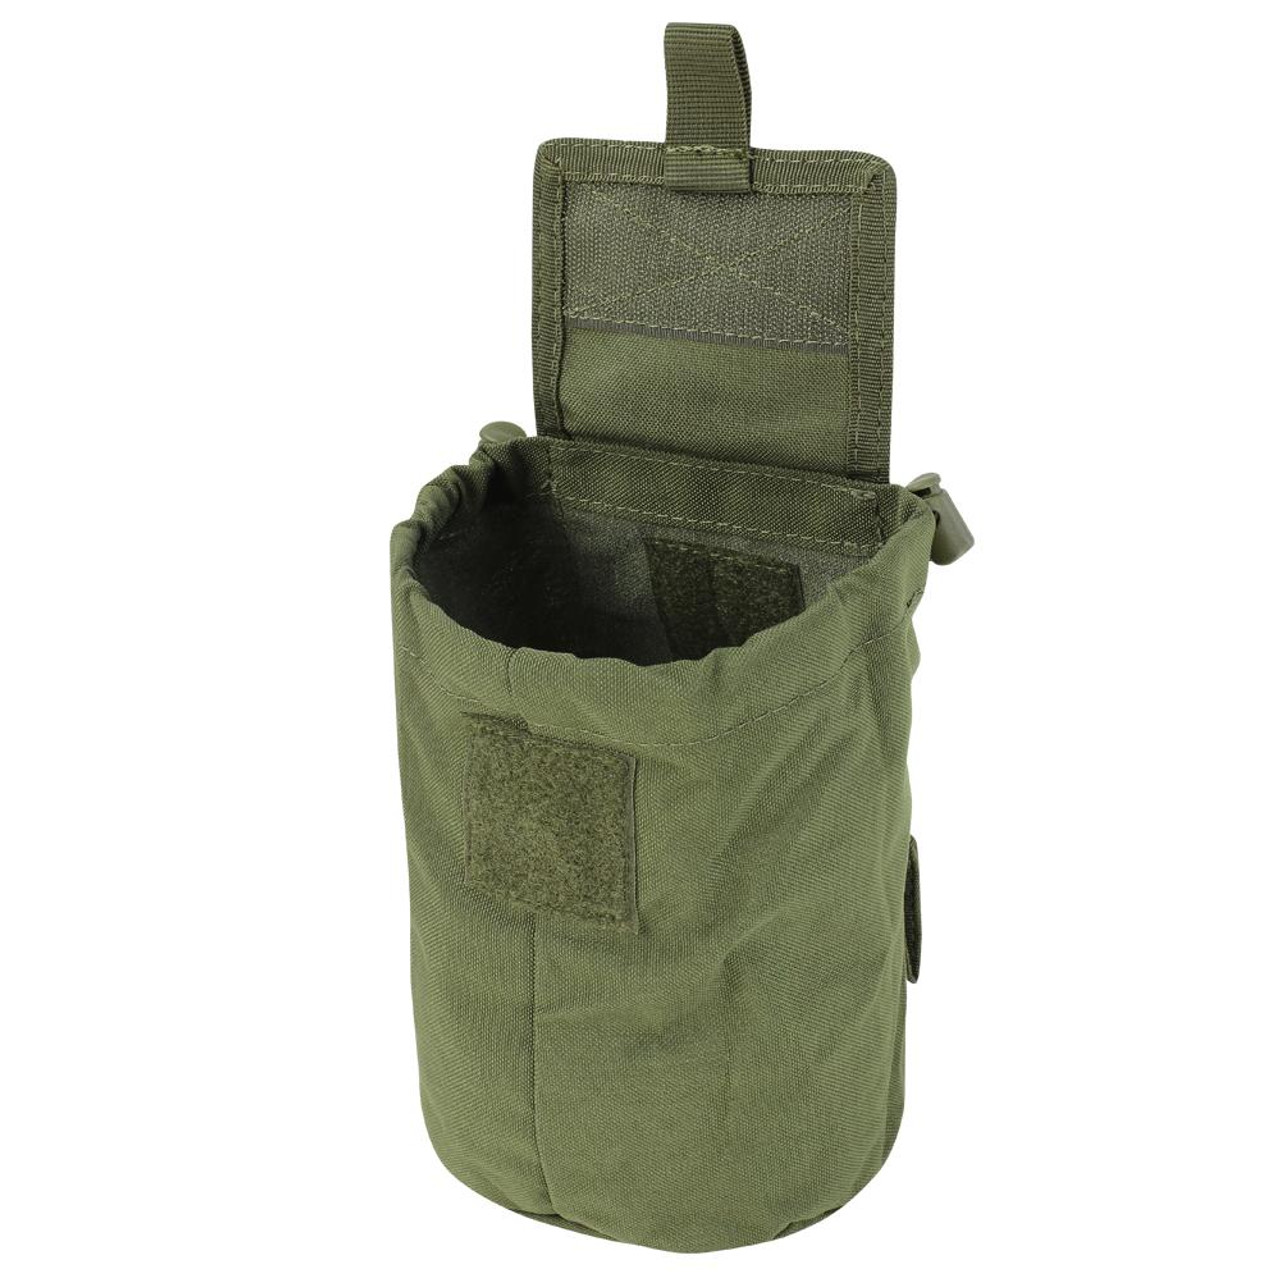 Condor Roll-Up Utility Pouch 